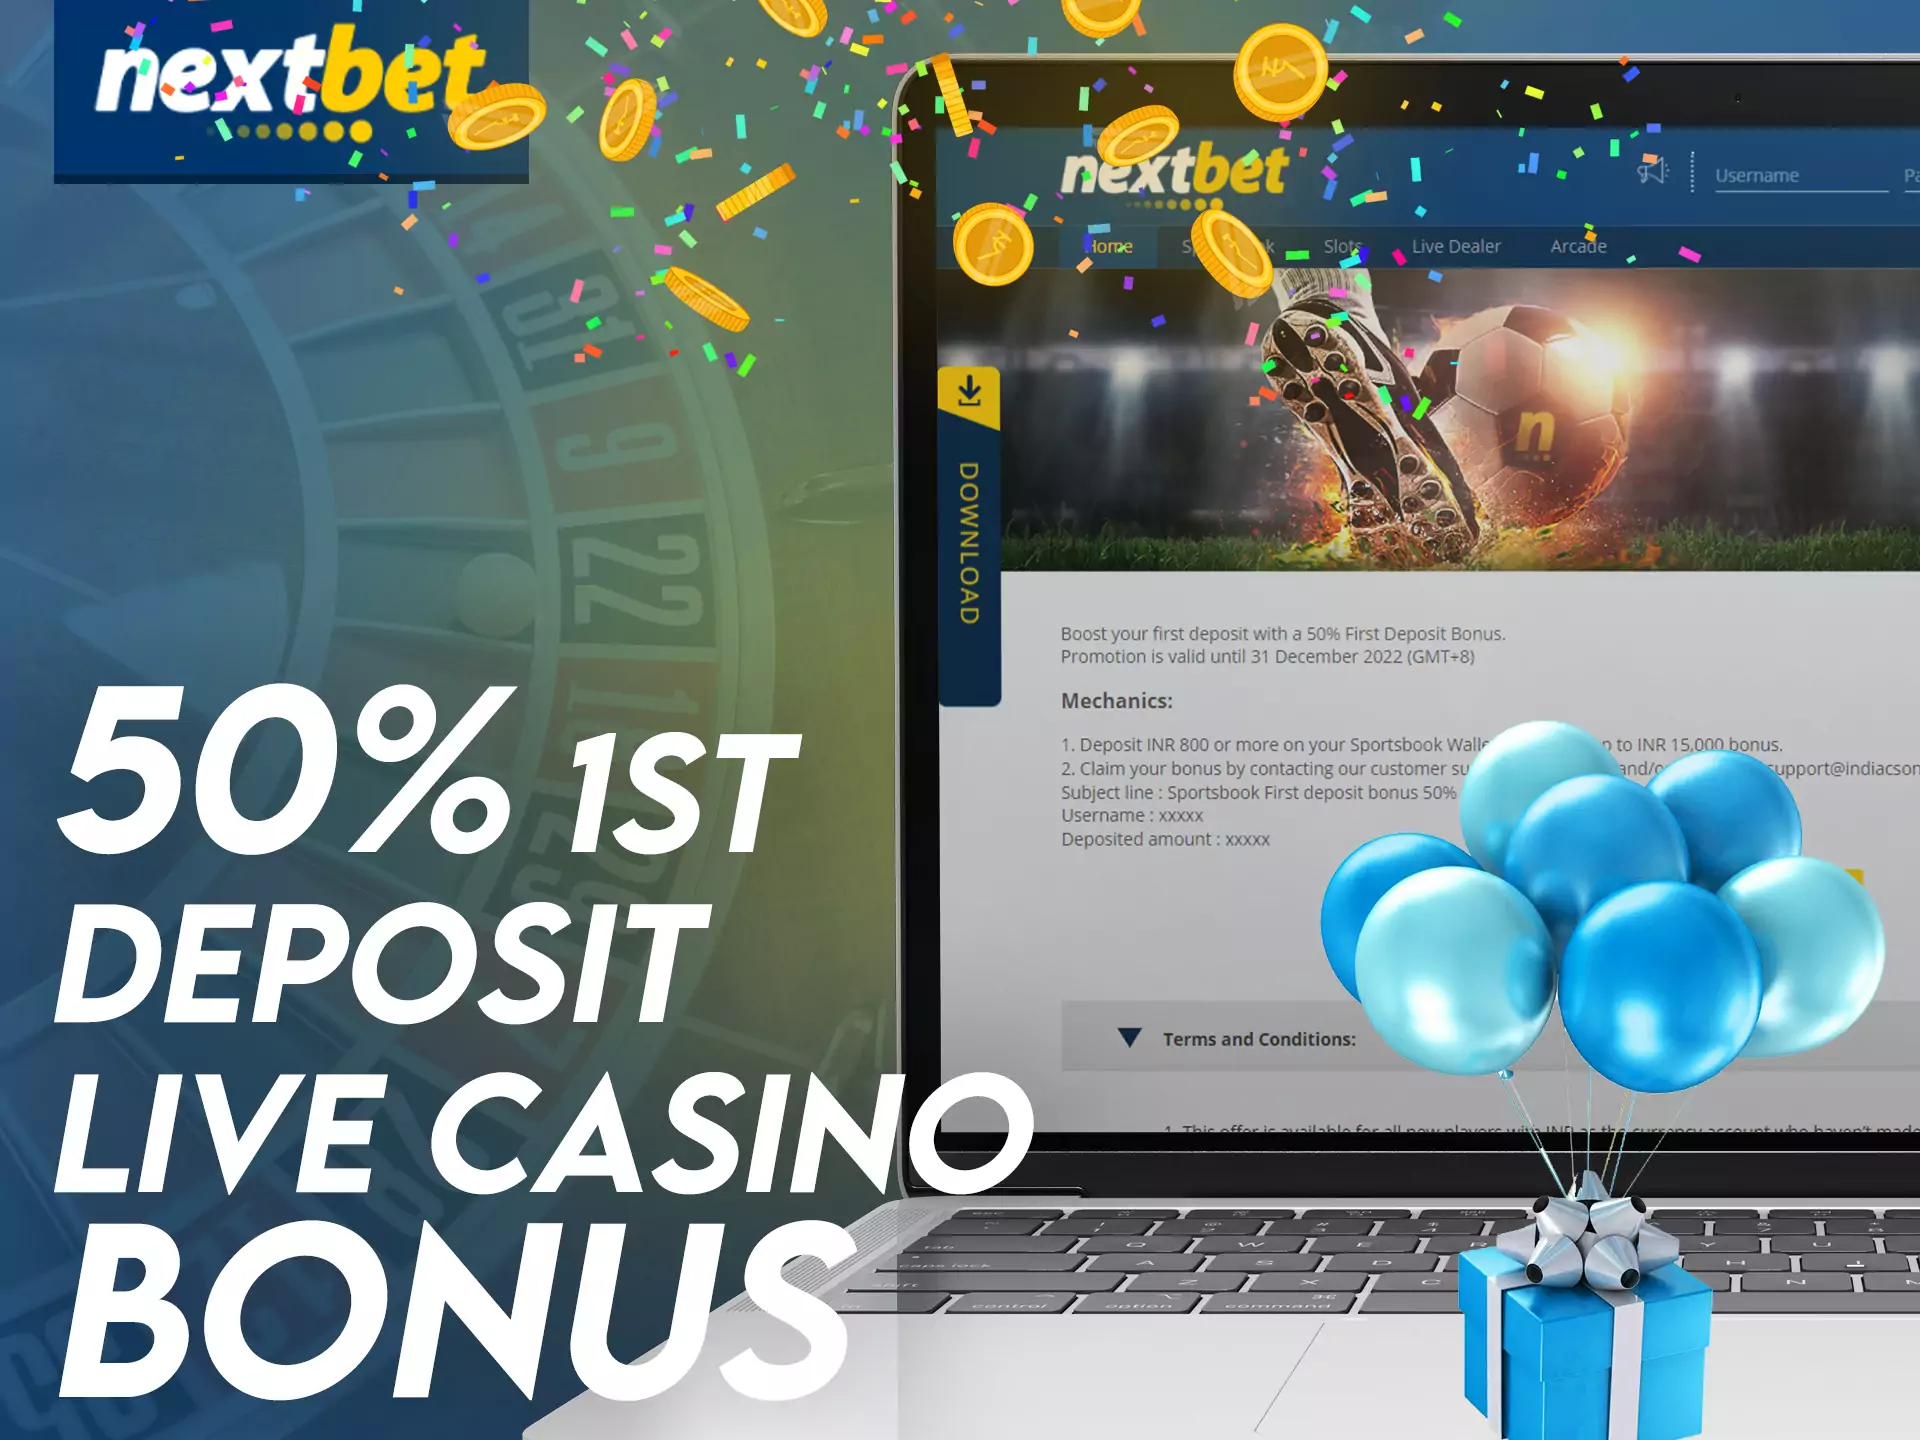 At Nextbet, you will receive a special bonus for your first deposit at a live casino.